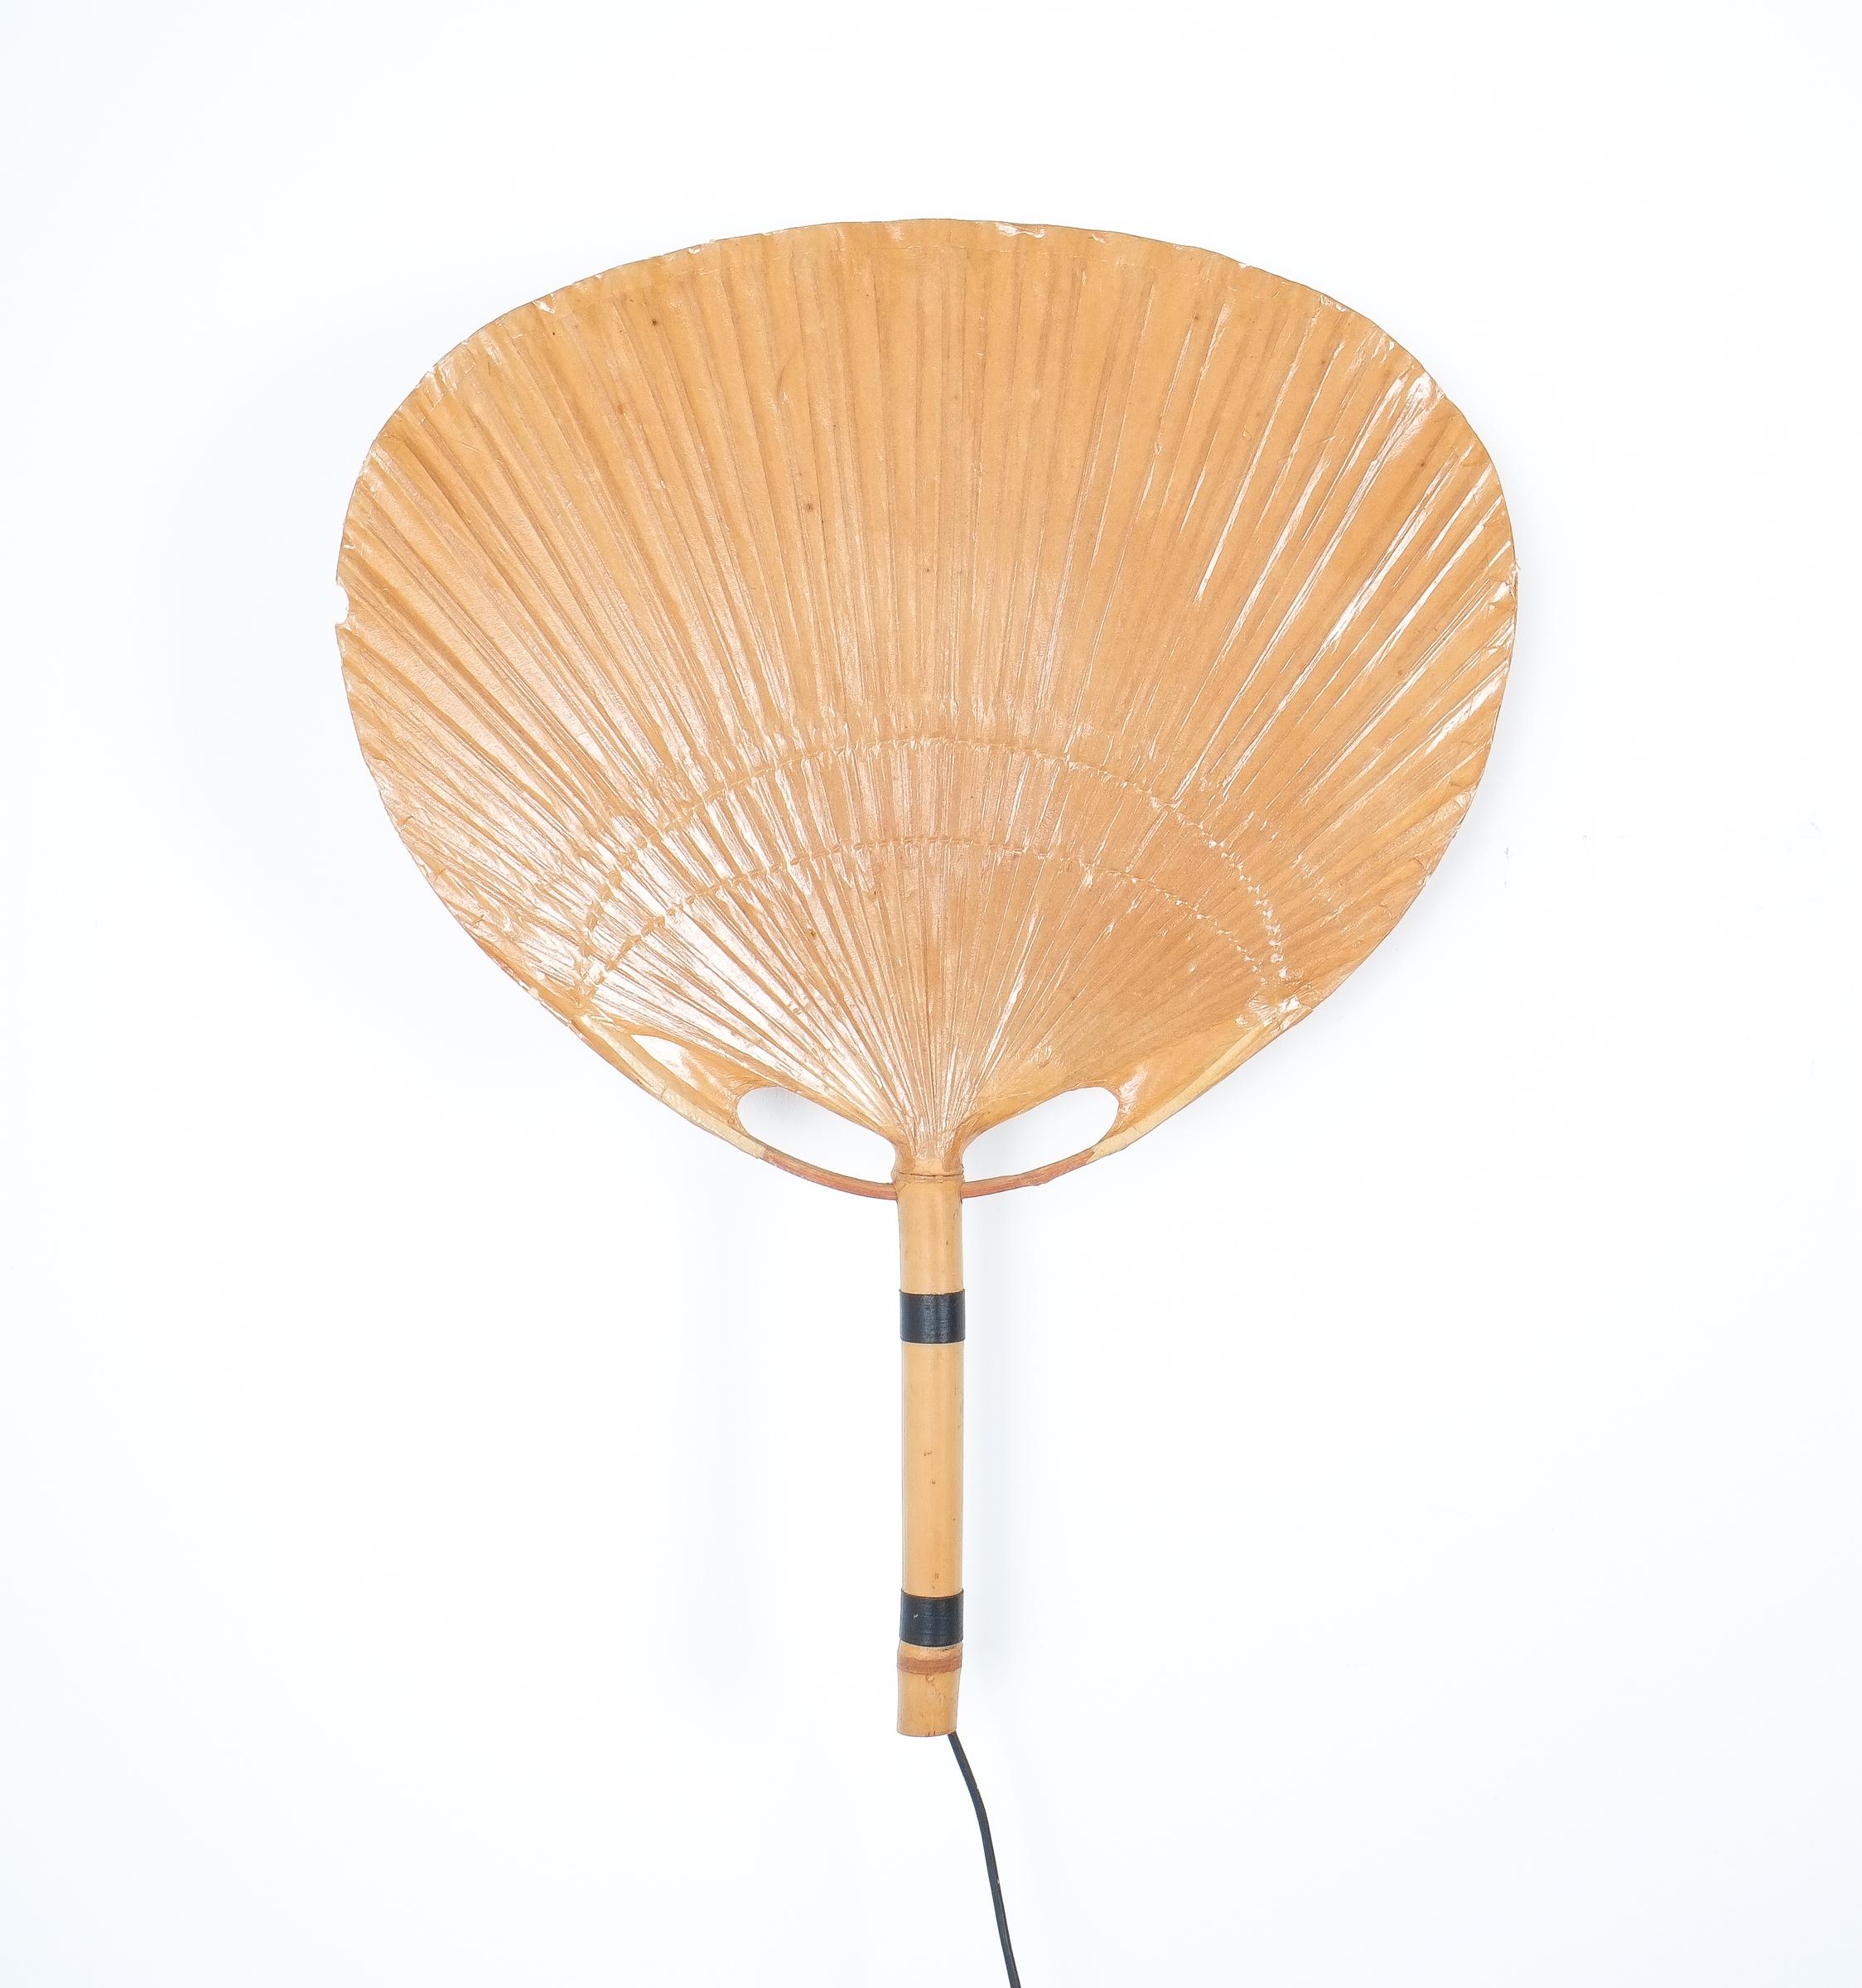 Ingo Maurer Uchiwa pair of paper wall lights, Germany, 1970. Nice pair of large Uchiwa lamps (a Japanese Uchiwa is a fan basically) made from paper and bamboo in fair to good condition. Measurements are 30